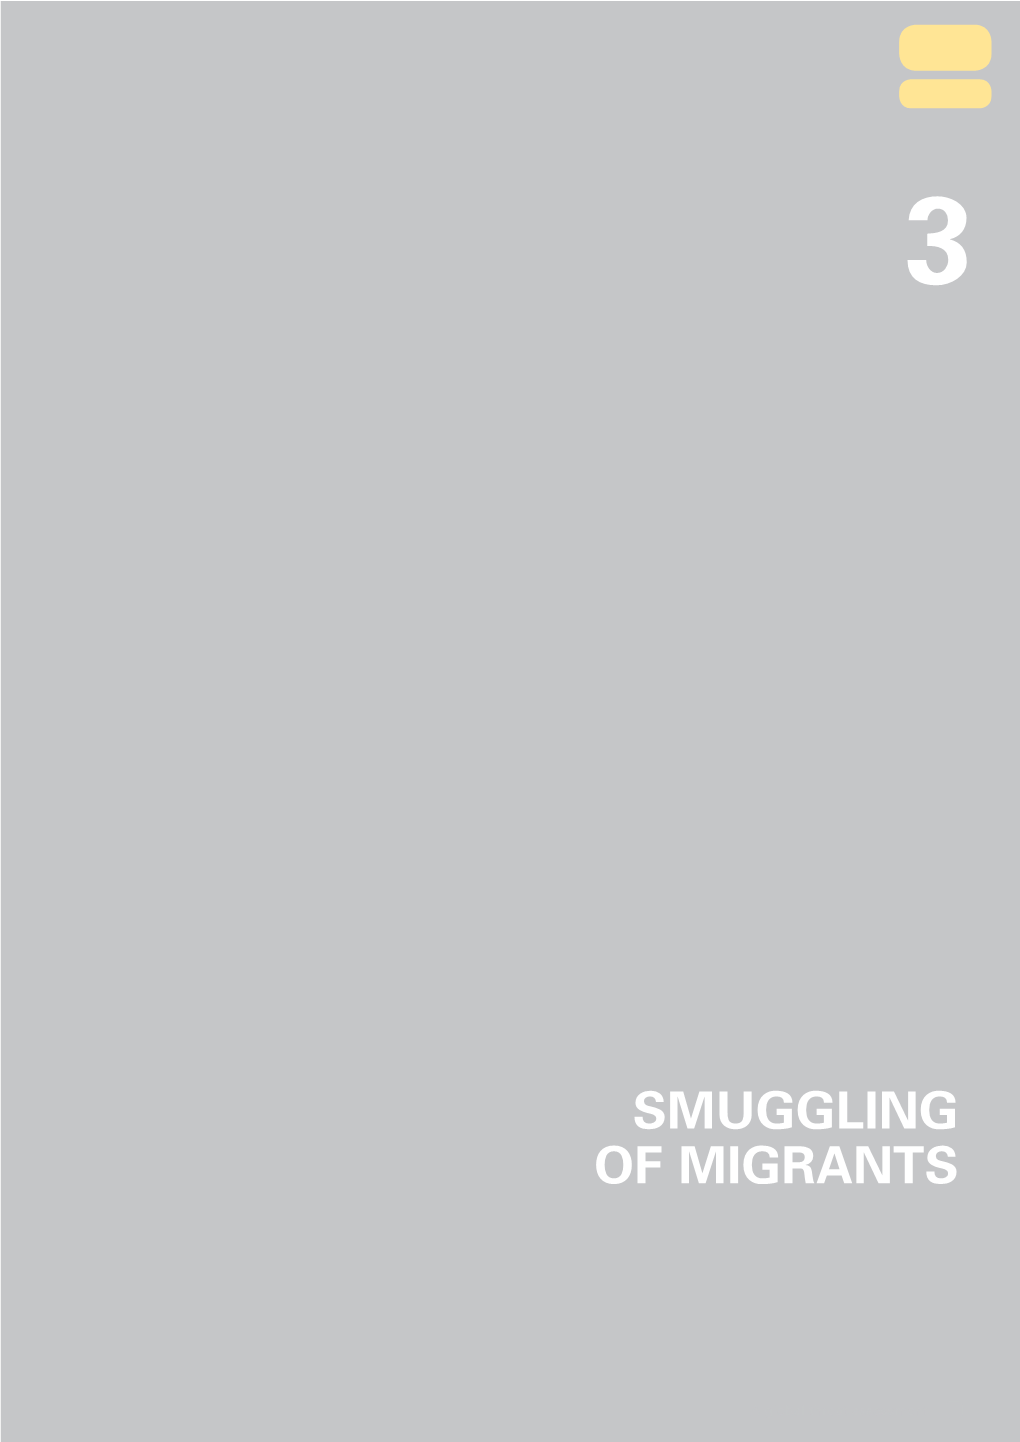 Smuggling of Migrants